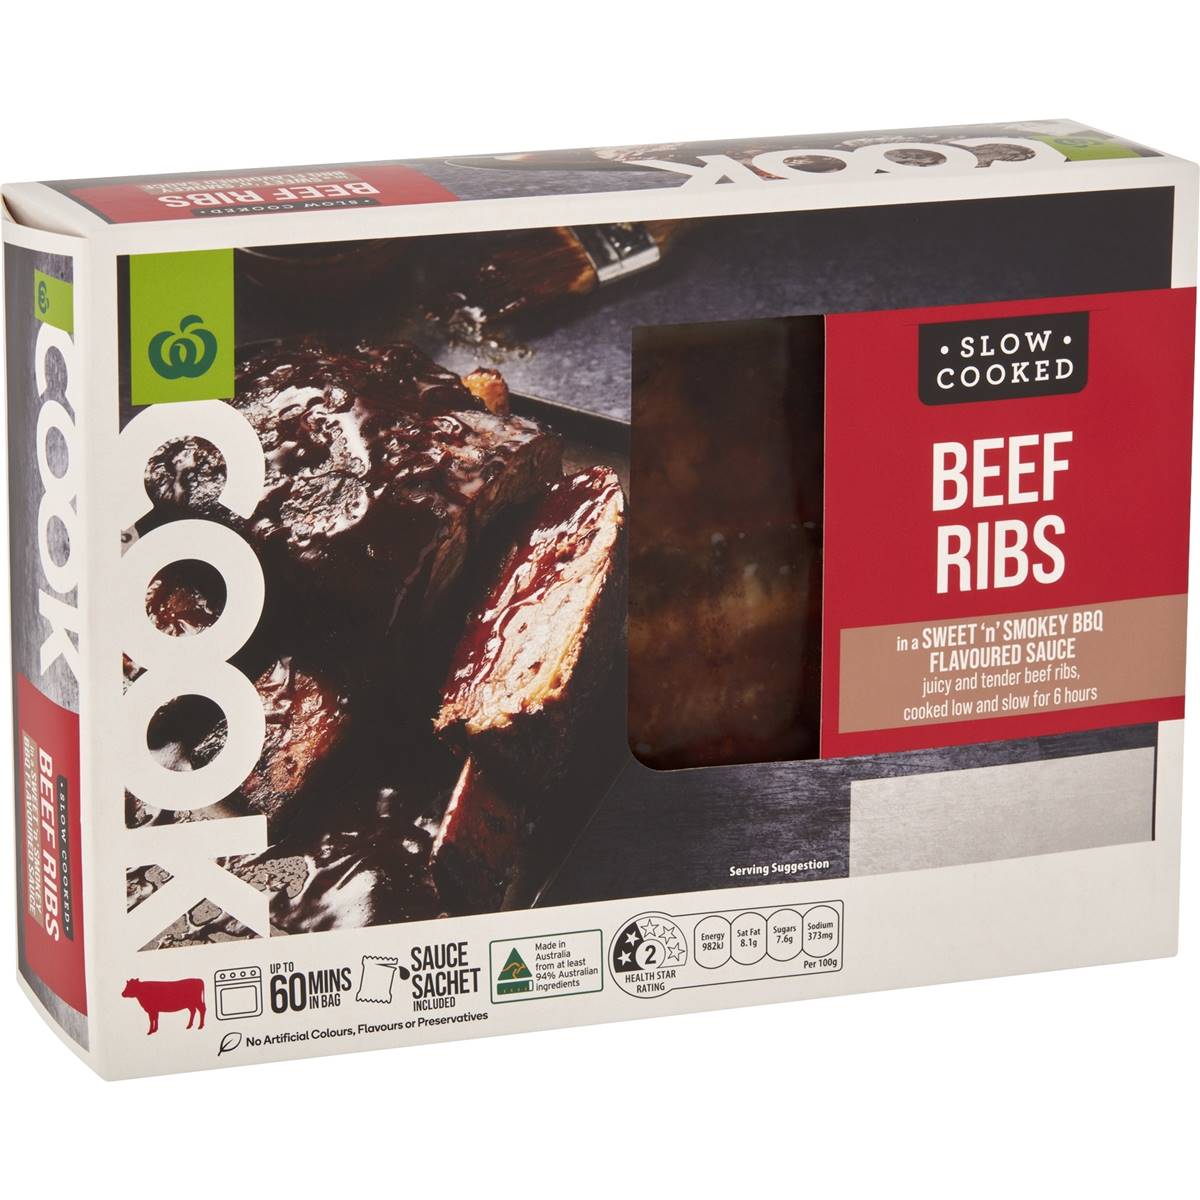 Calories in Woolworths Cook Slow Cooked Beef Ribs In Sweet 'n' Smokey Bbq Sauce